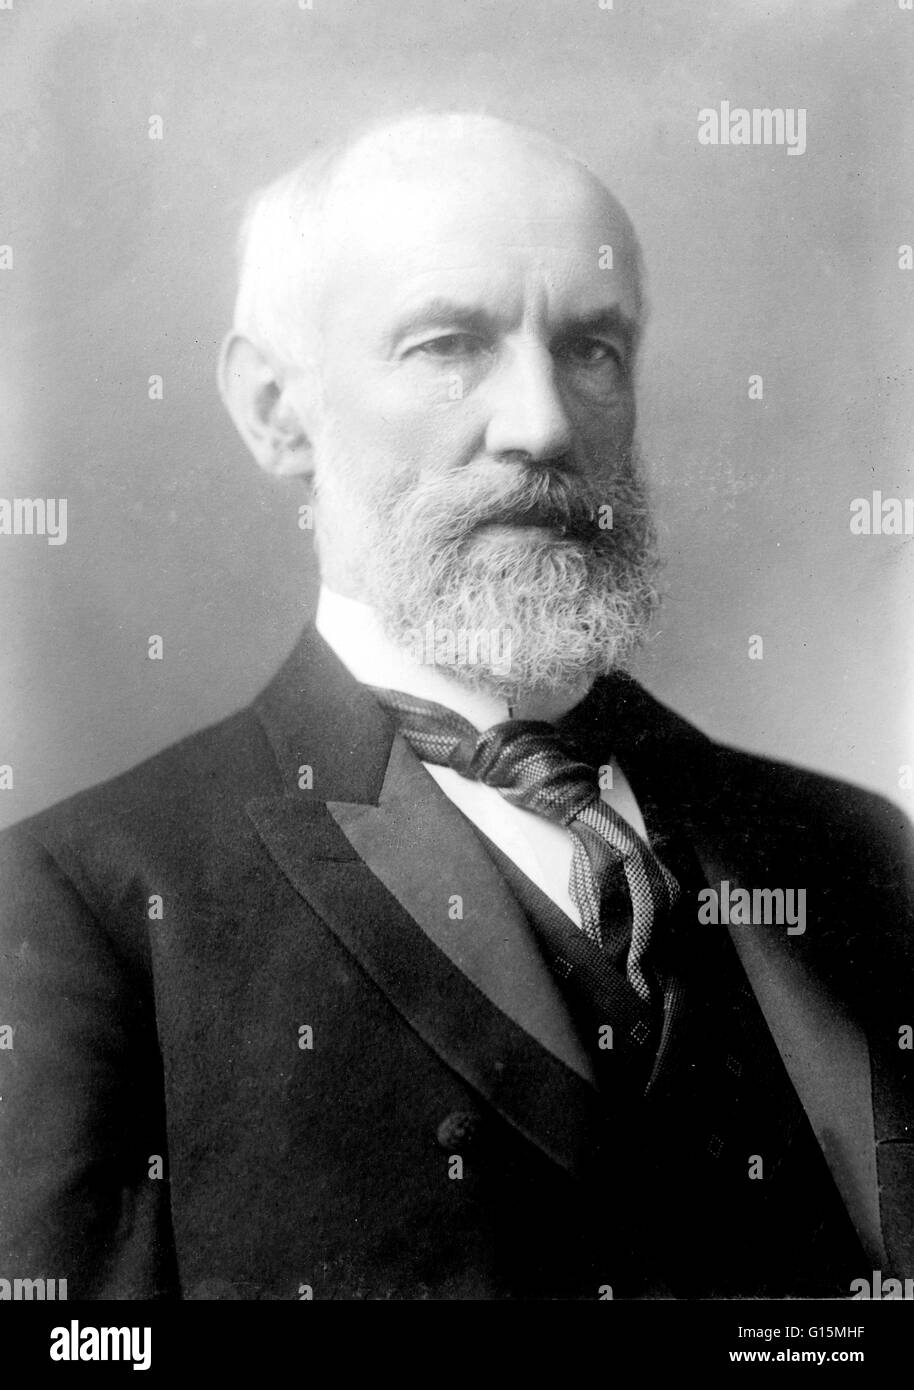 Granville Stanley Hall (February 1, 1844 - April 24, 1924) was a pioneering American psychologist and educator. His interests focused on childhood development and evolutionary theory. In 1887, Hall founded the American Journal of Psychology and in 1892 wa Stock Photo